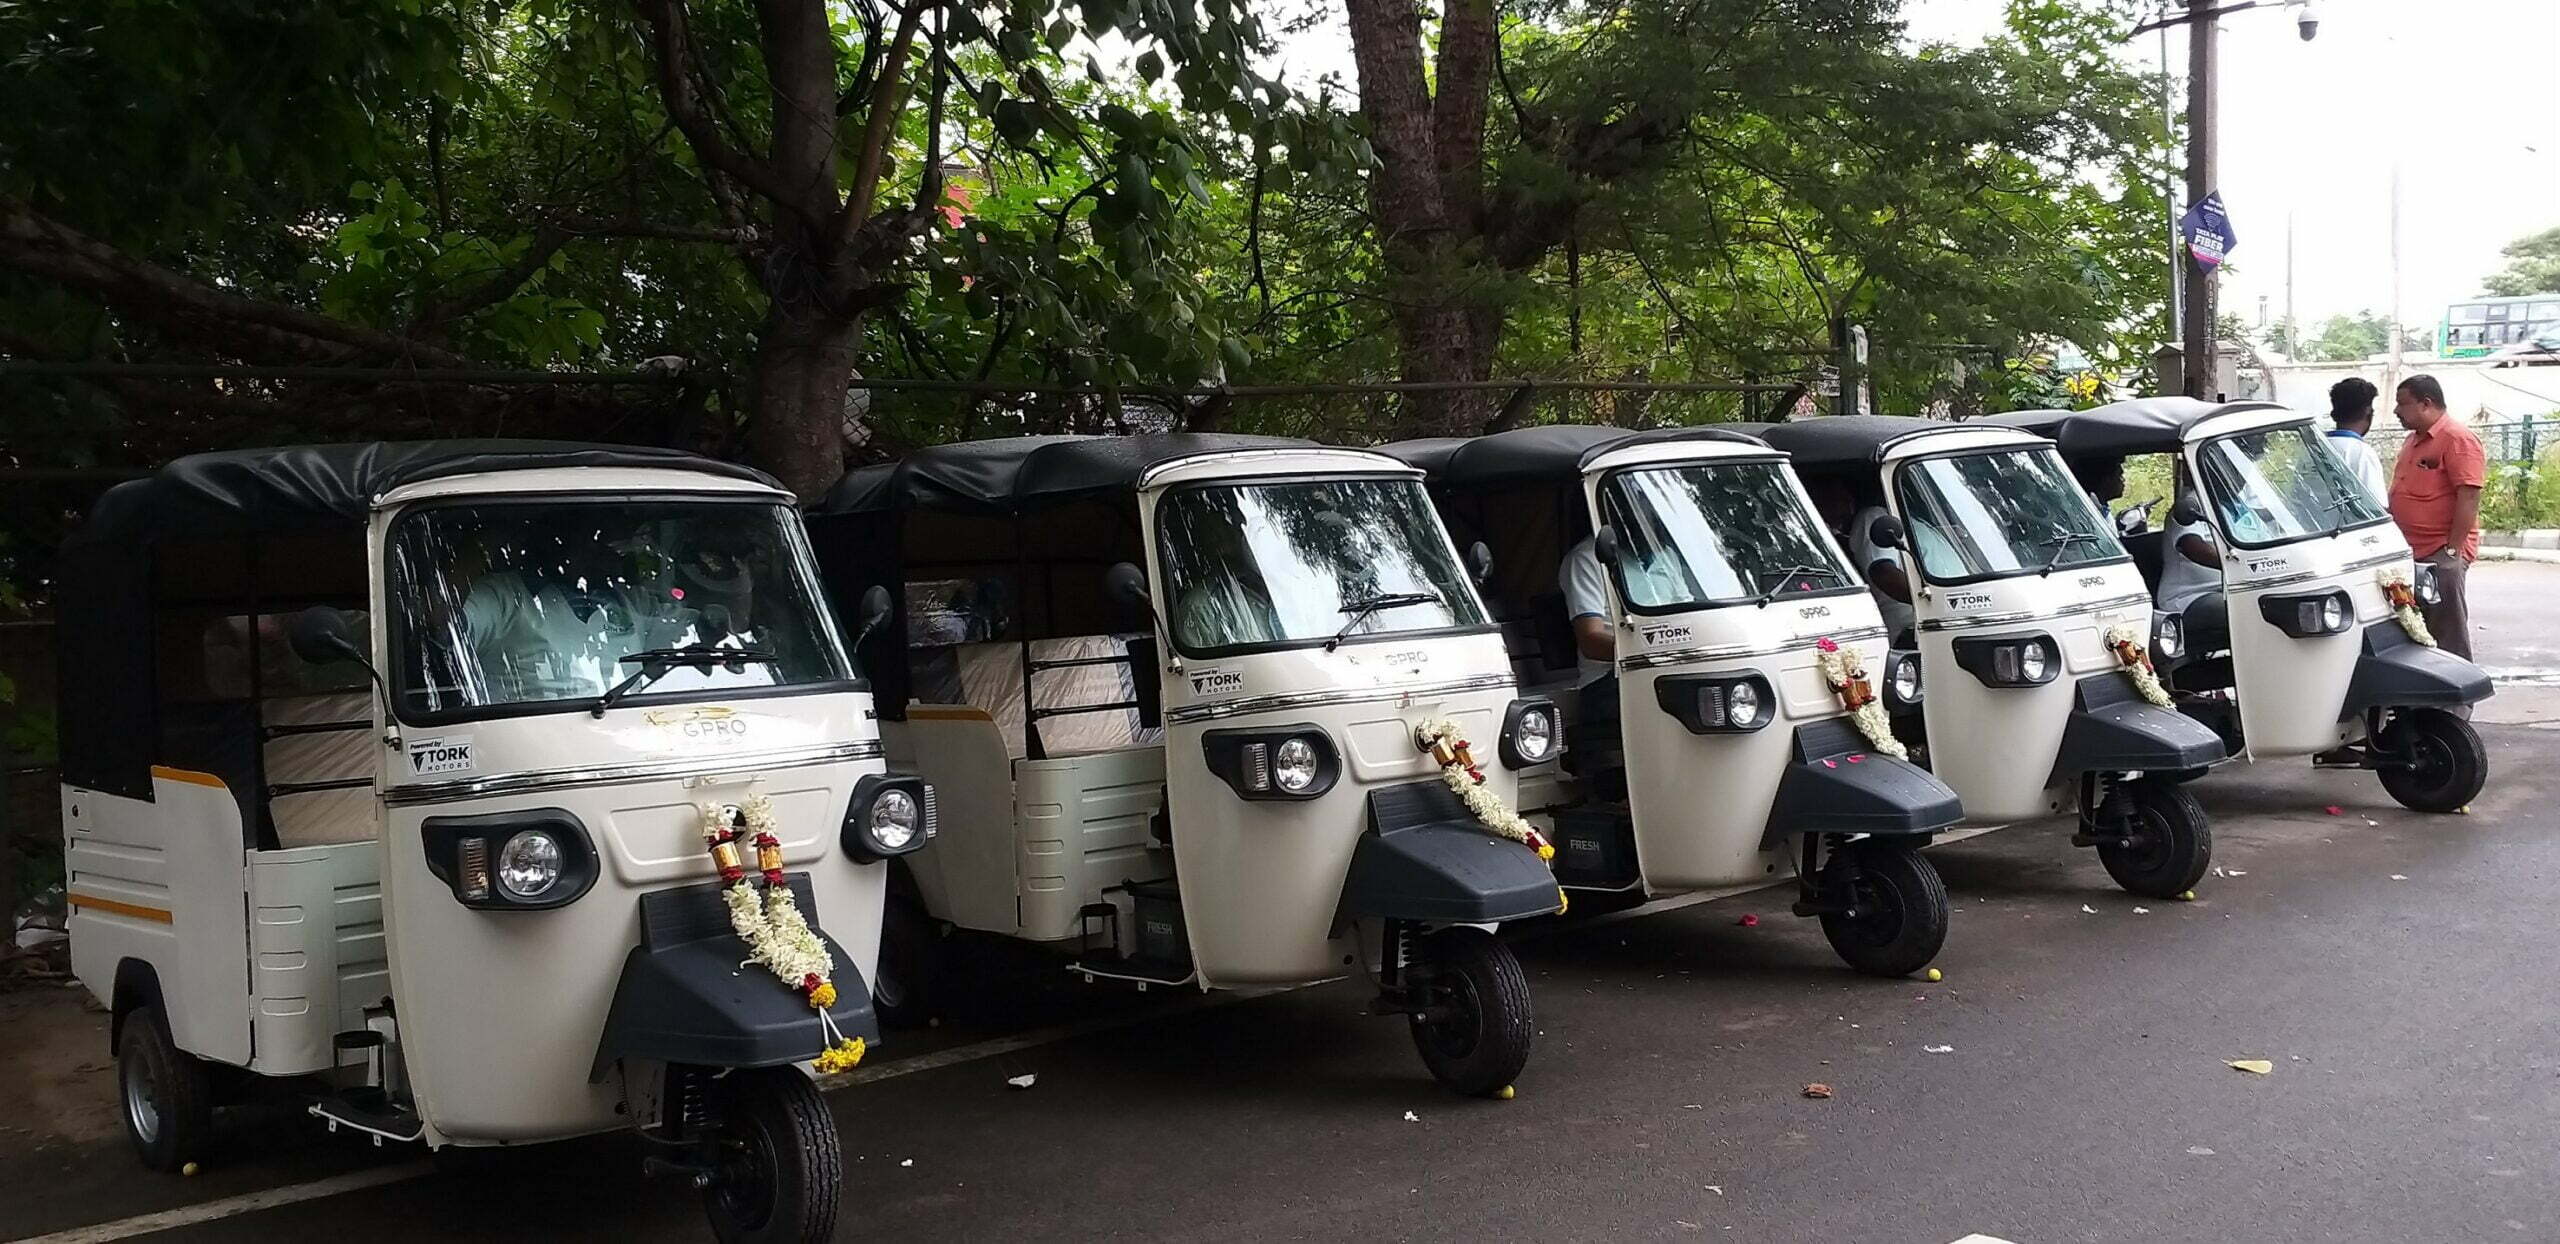 Lith Pwr Mobility Pvt Ltd Makes E-Rickshaw With Tork's Motor And Honda E-Swap Battery (1)